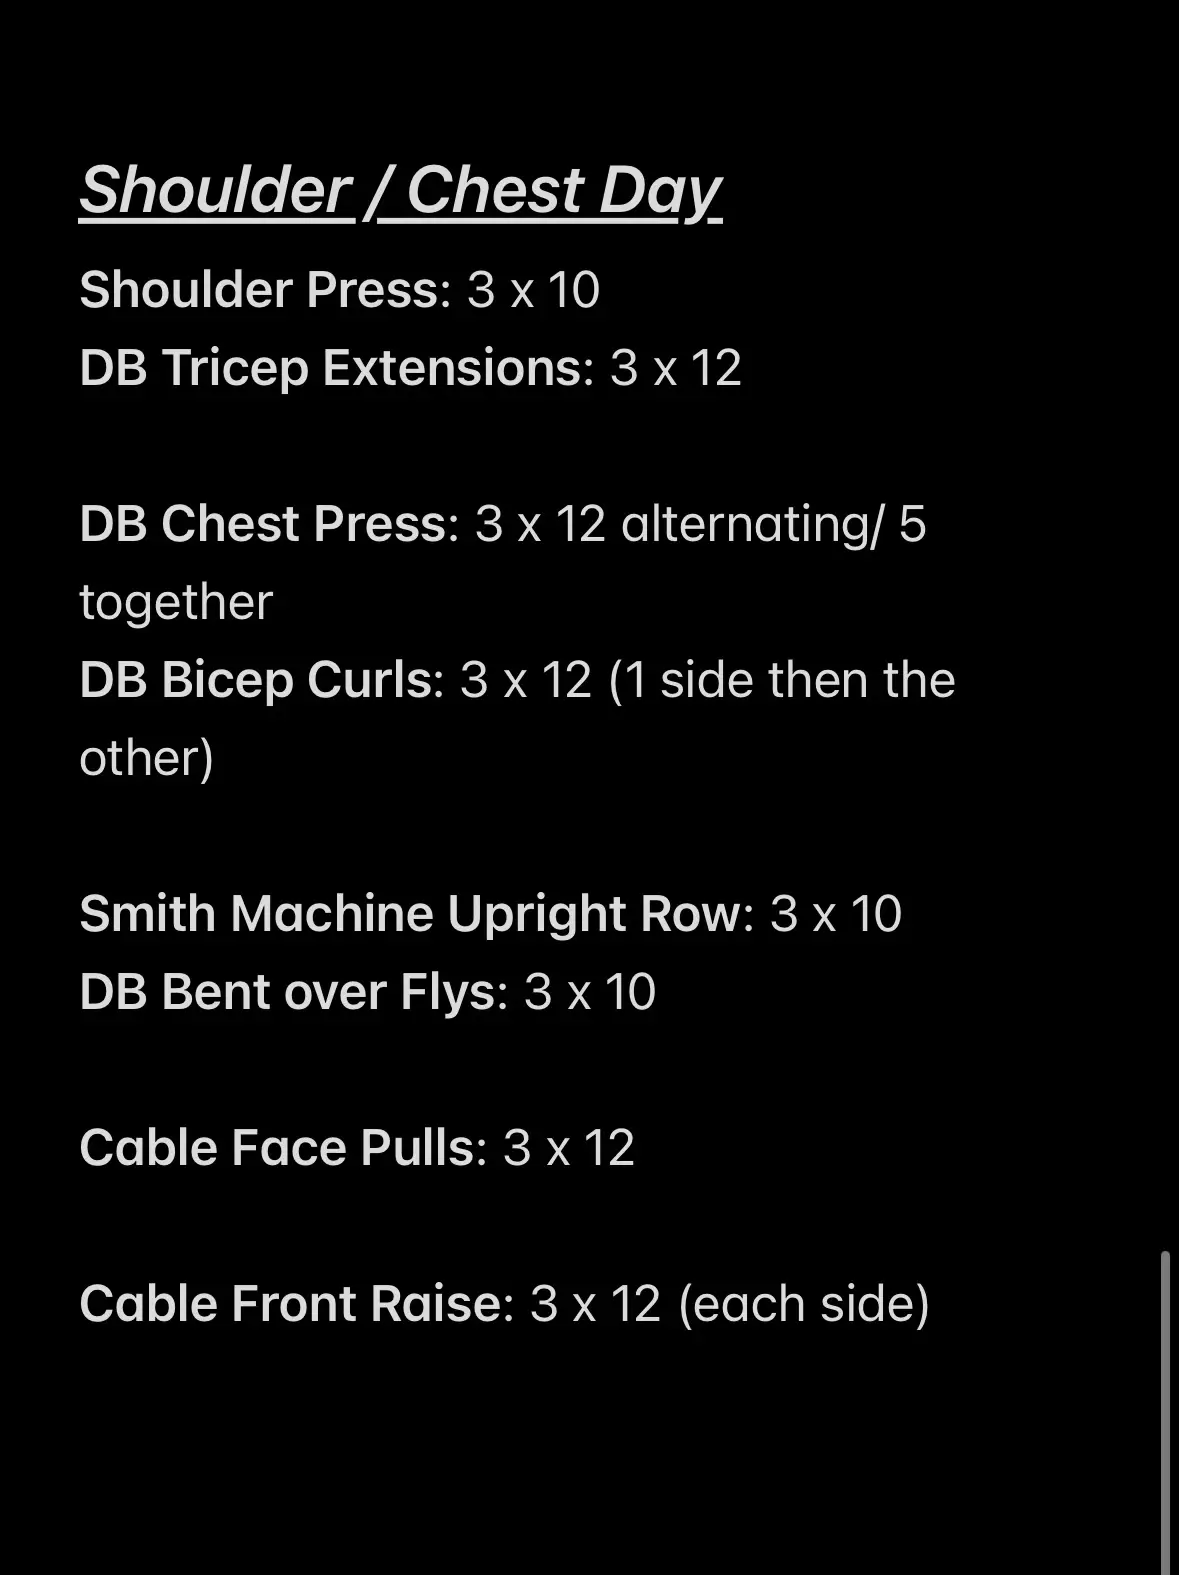 Pump Up Your Chest, Shoulders and Arms With These Ultra Effective  'Push-Pull' Supersets